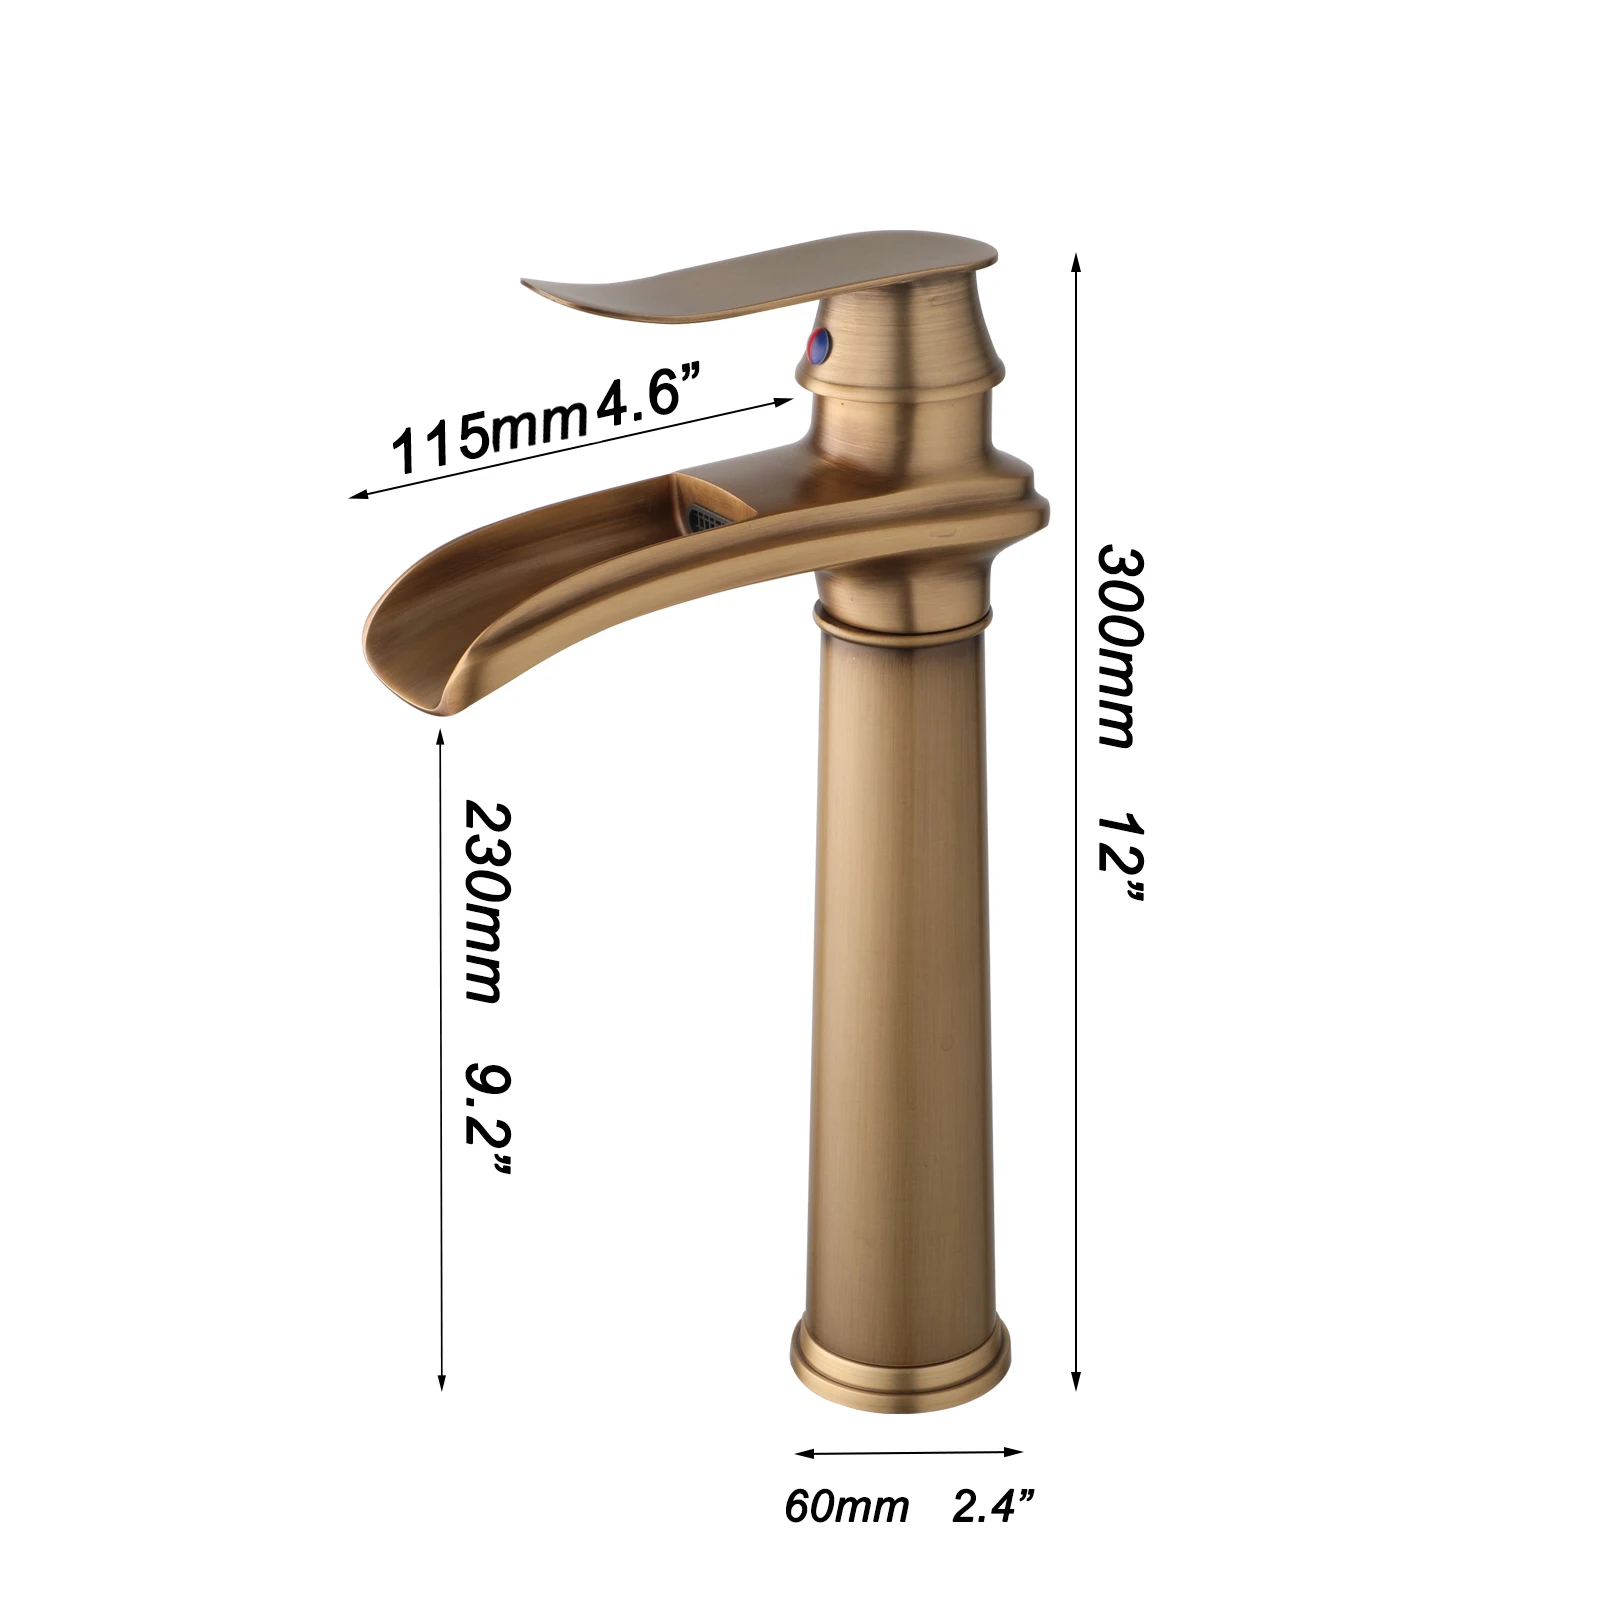 ZAPPO Antique Brass Bathroom Vessel Sink Faucet Waterfall Bathroom Faucets Solid Brass Lavatory Vanity Faucet Black Mixer Tap images - 6